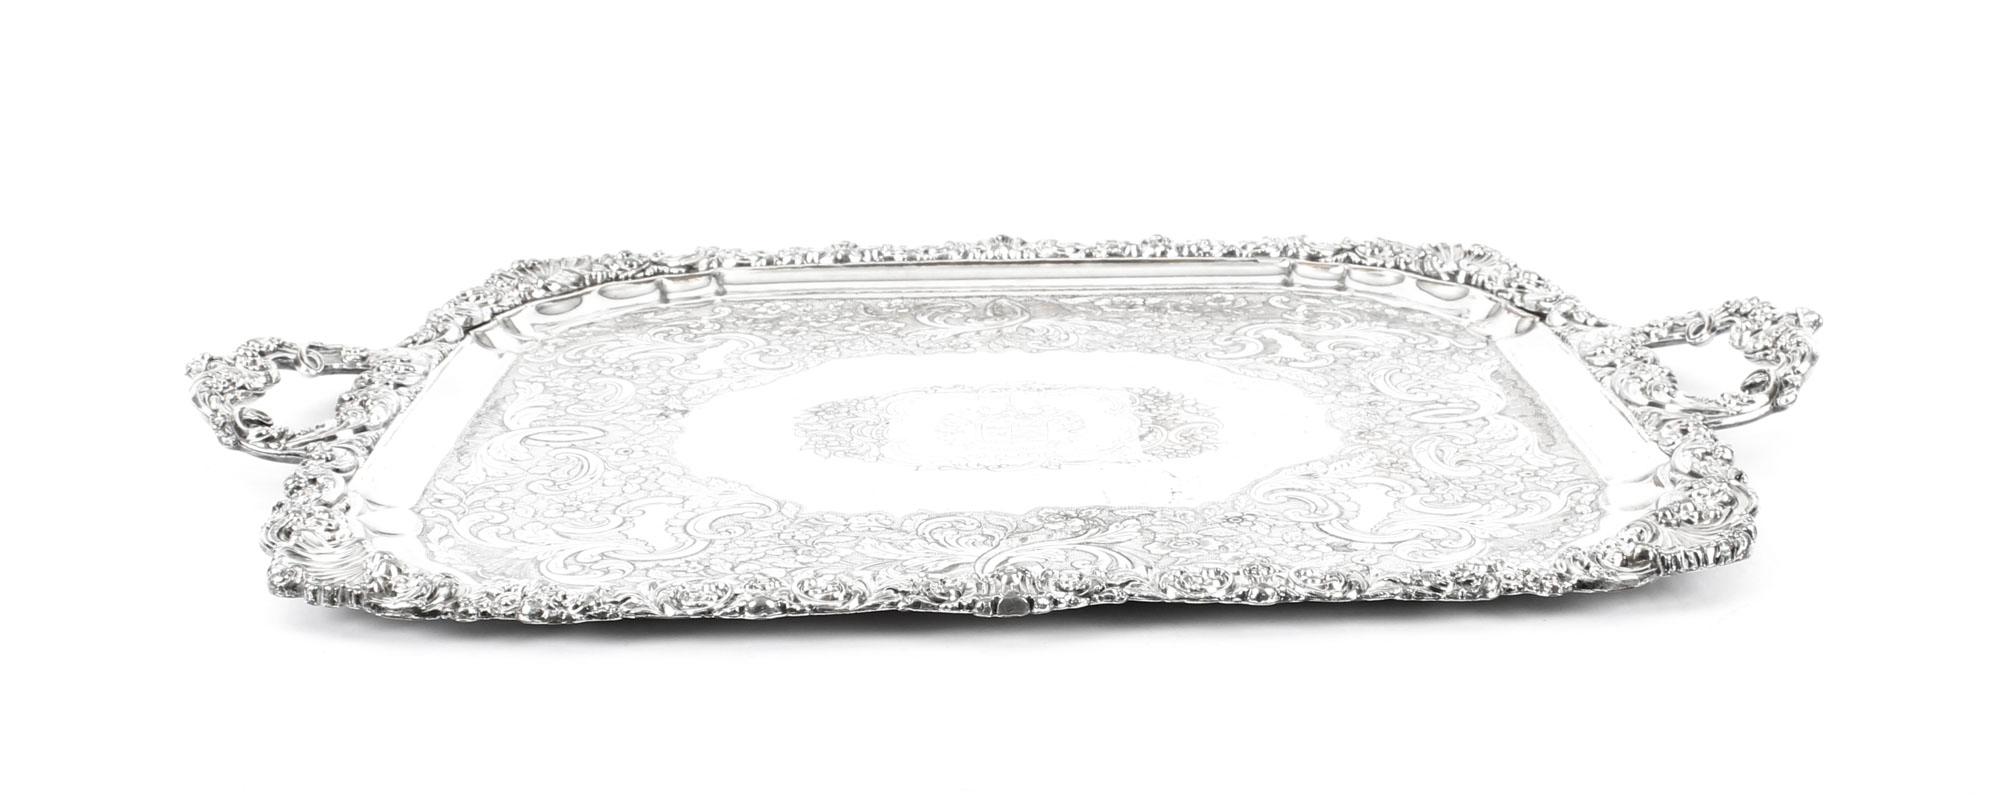 19th Century Regency Old Sheffield Silver Plated Tray with Cavendo Tutus Crest 1